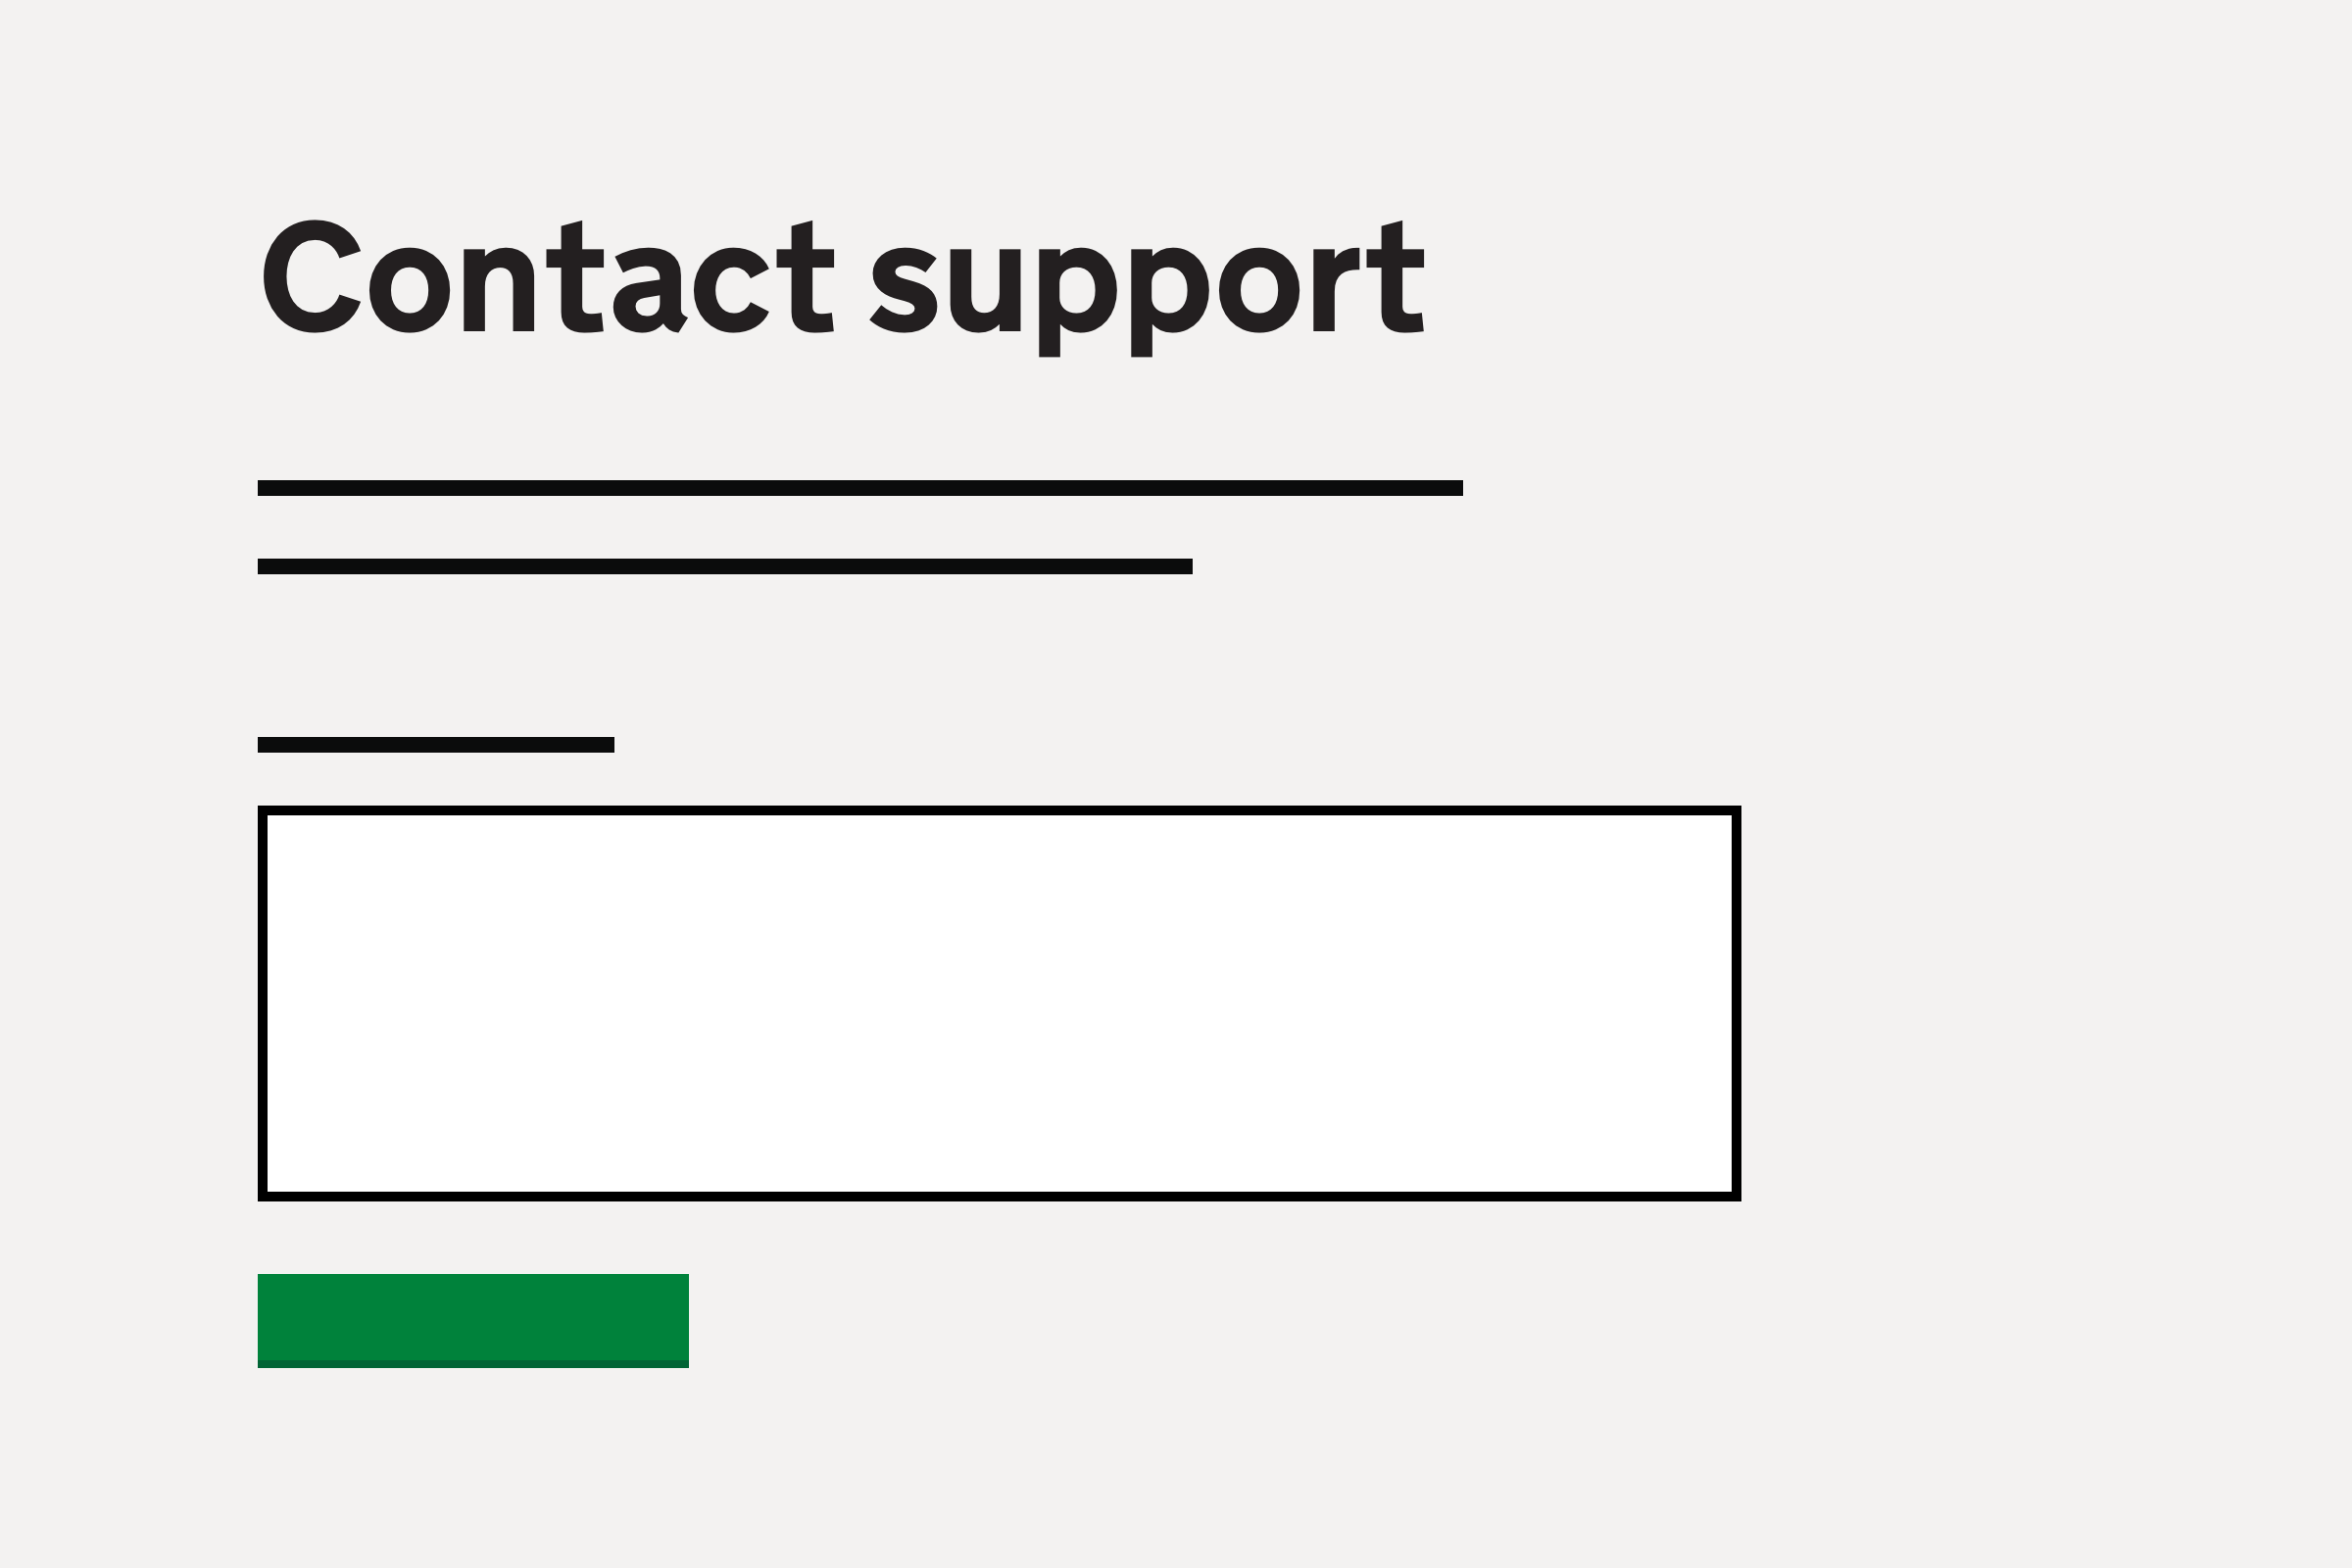 Illustration showing a heading “Contact support’ with lines indicating some text content, a large text input box, and a green button.